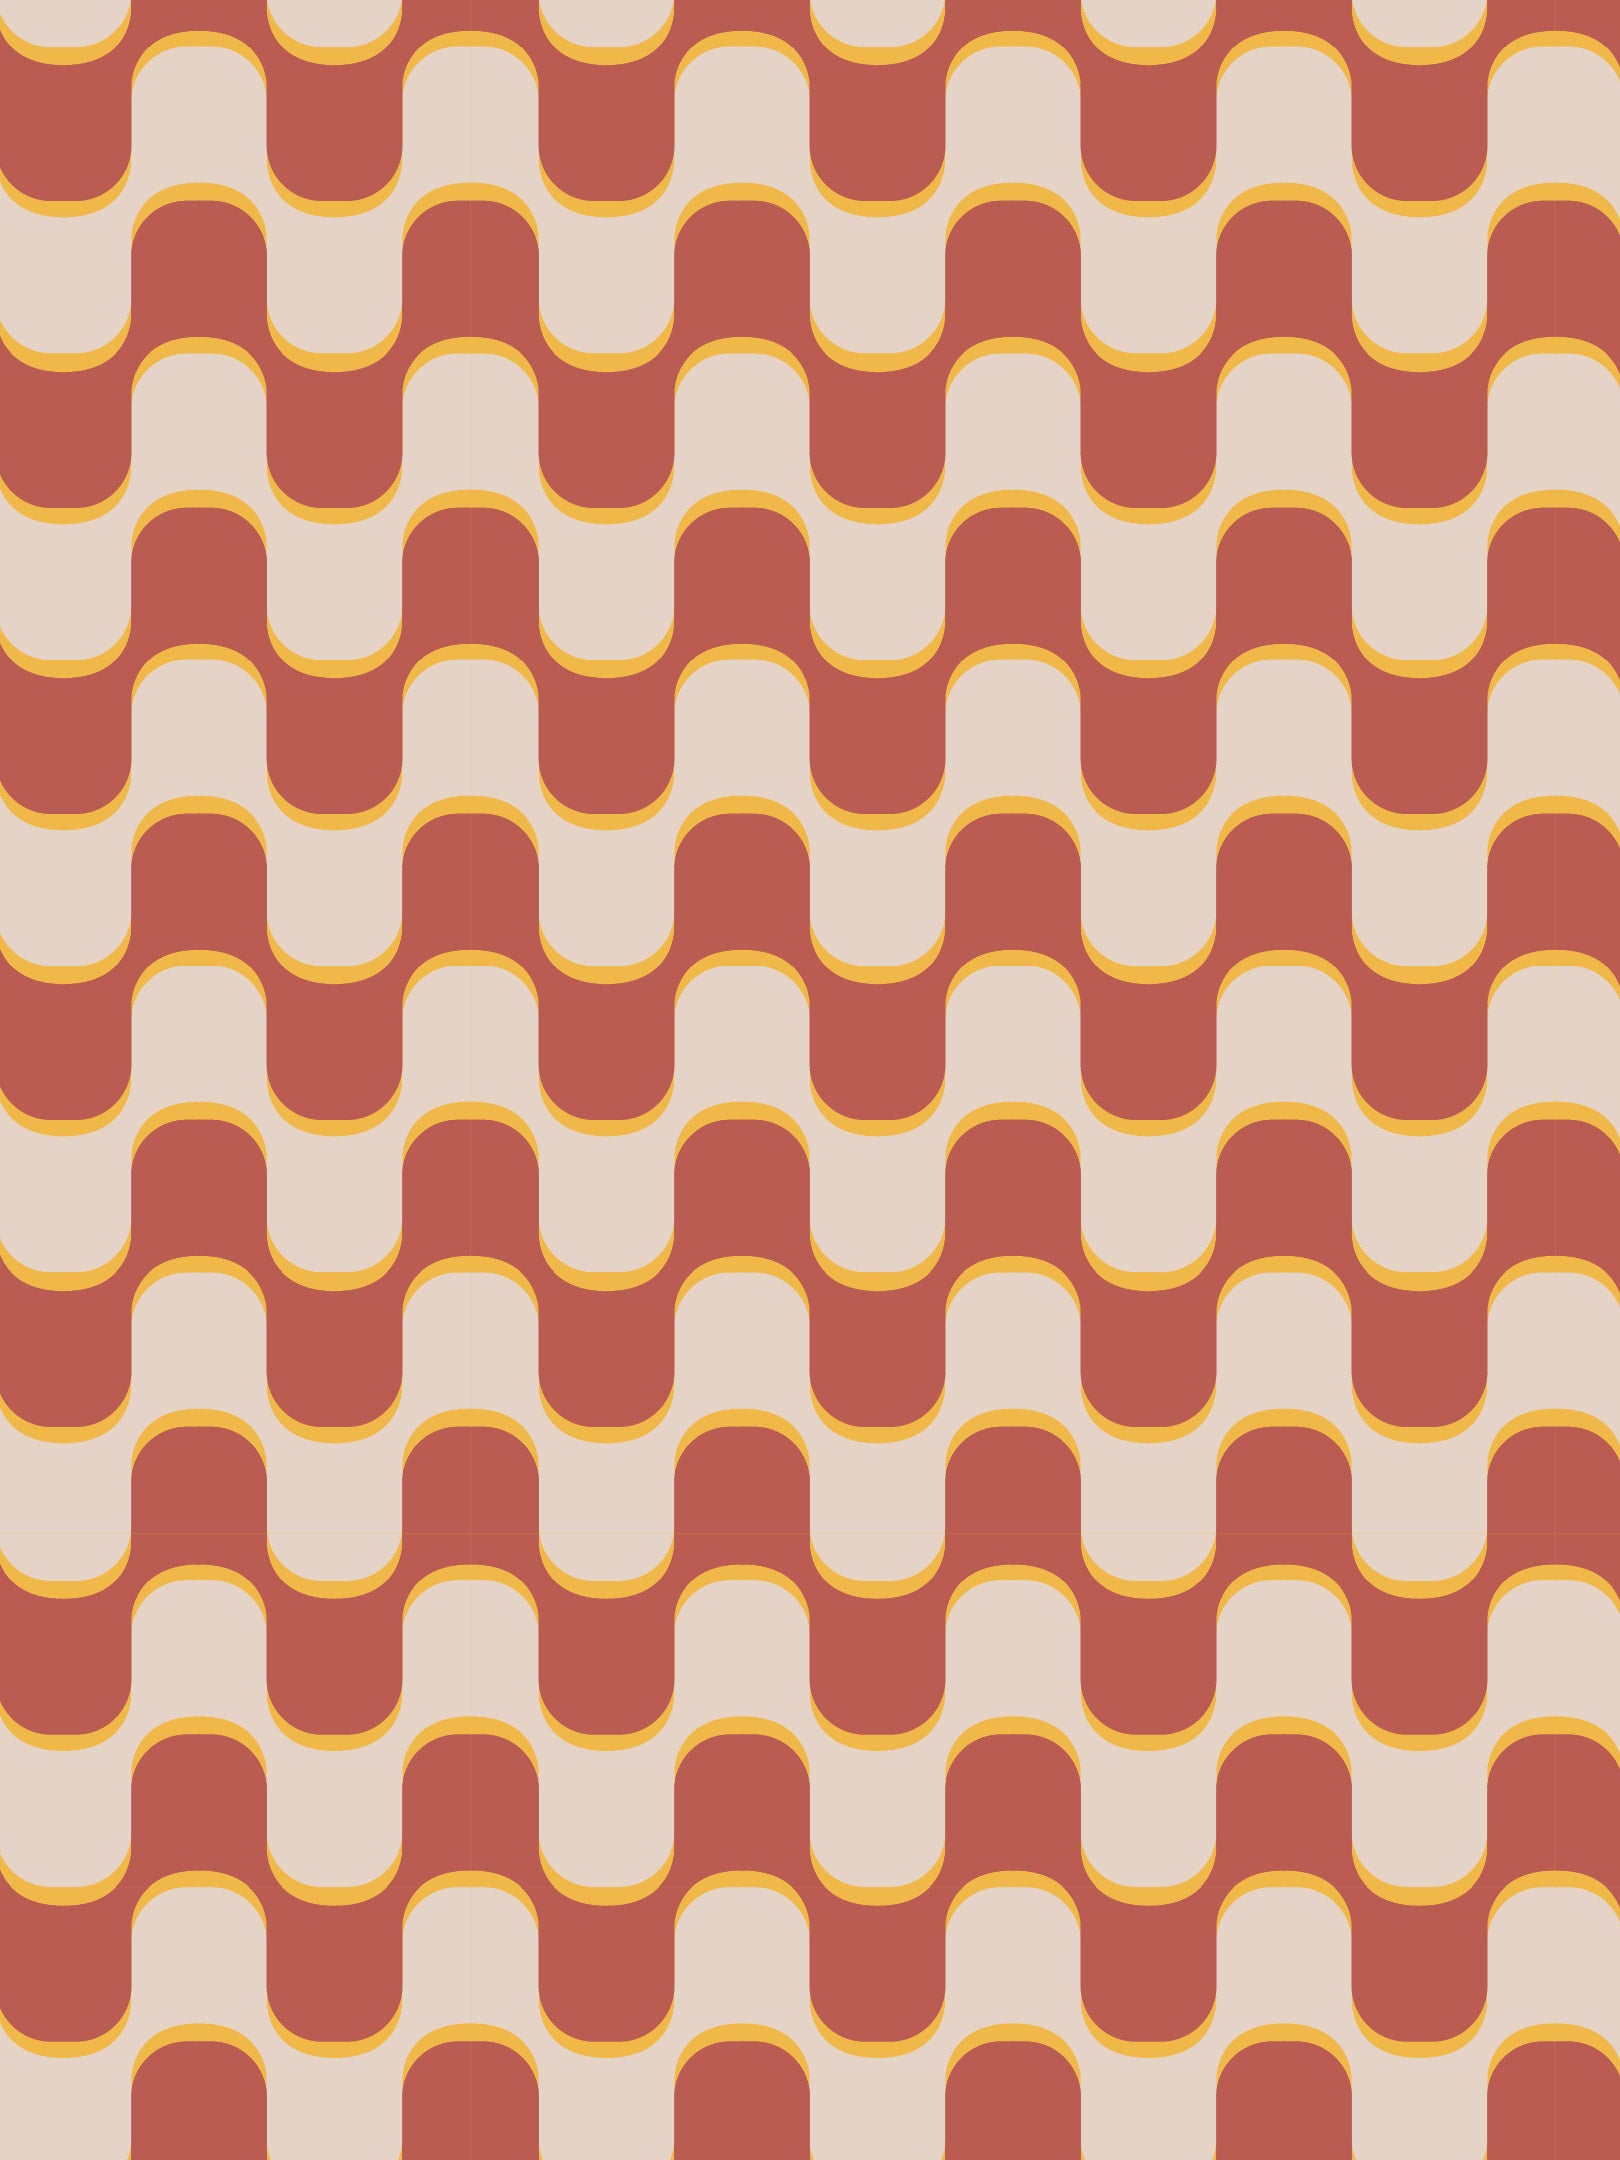 Retro Red and Yellow Wallpaper